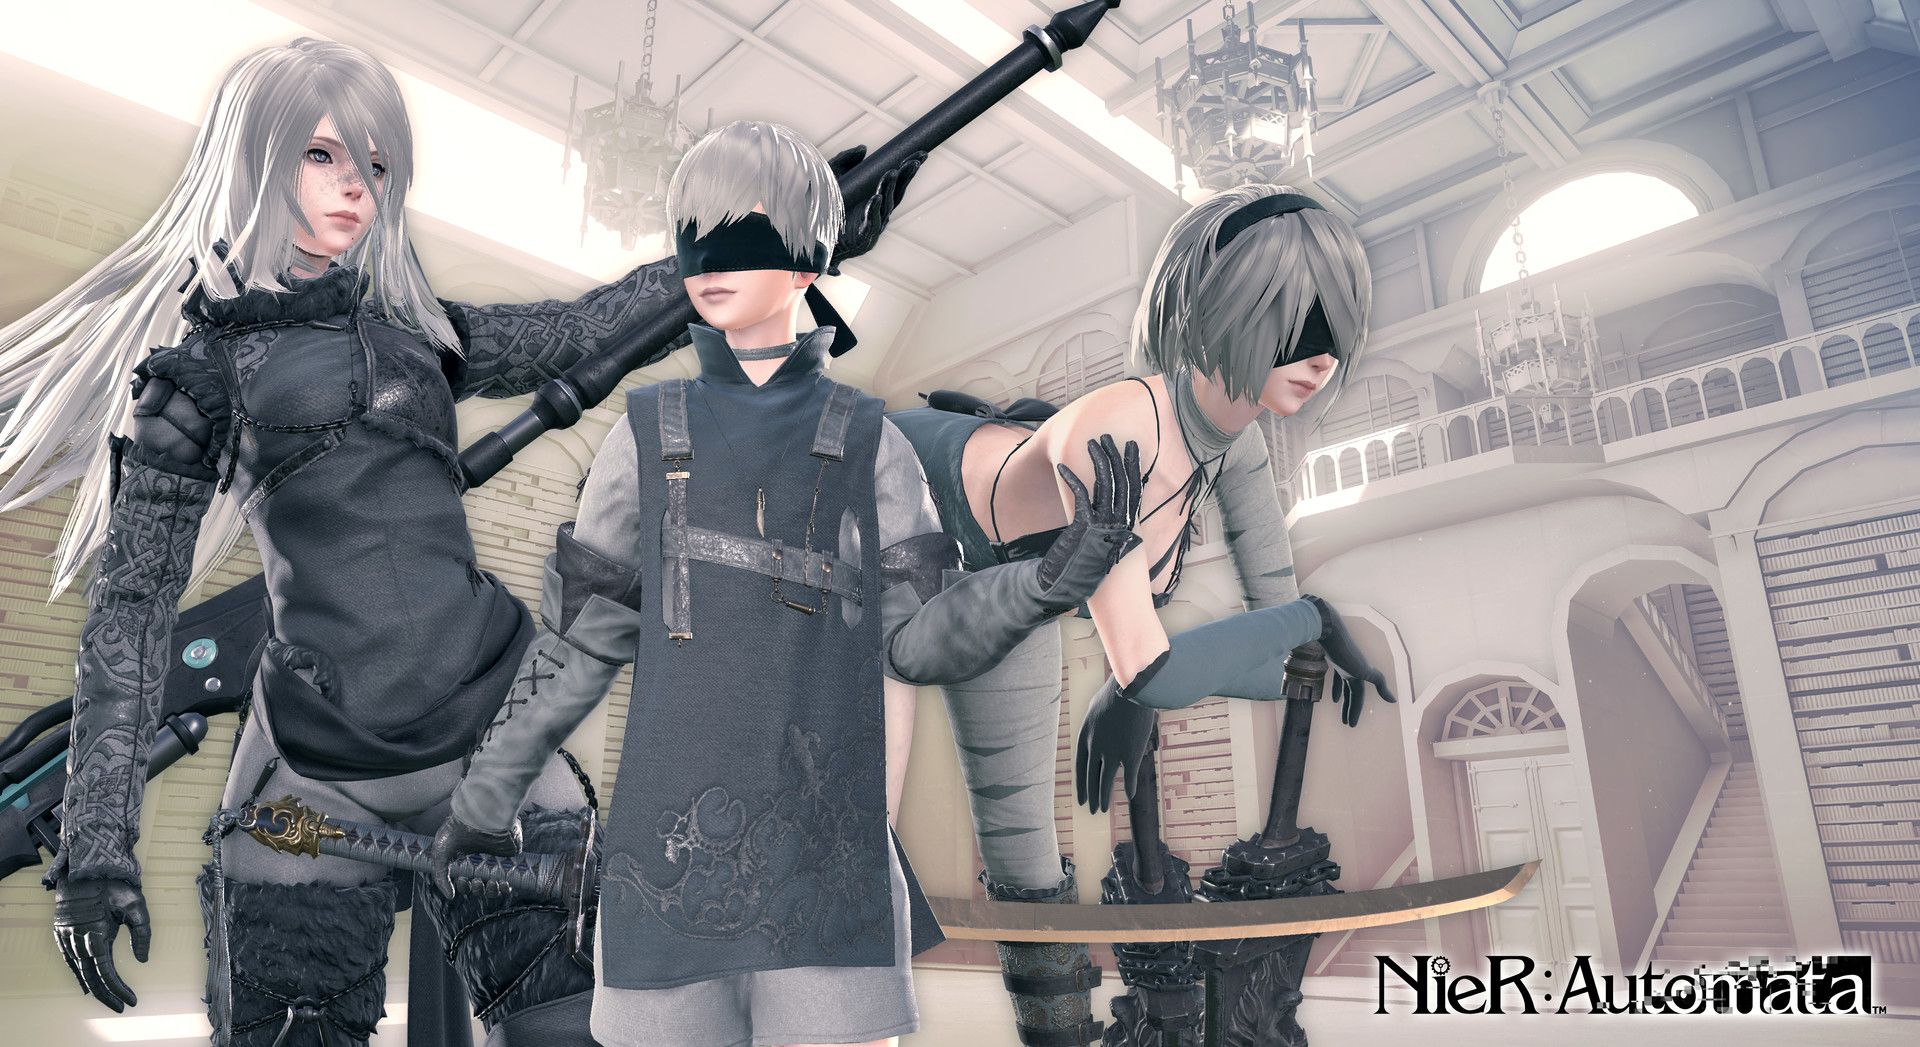 Save 50% on NieR:Automata™ - 3C3C1D119440927 on Steam